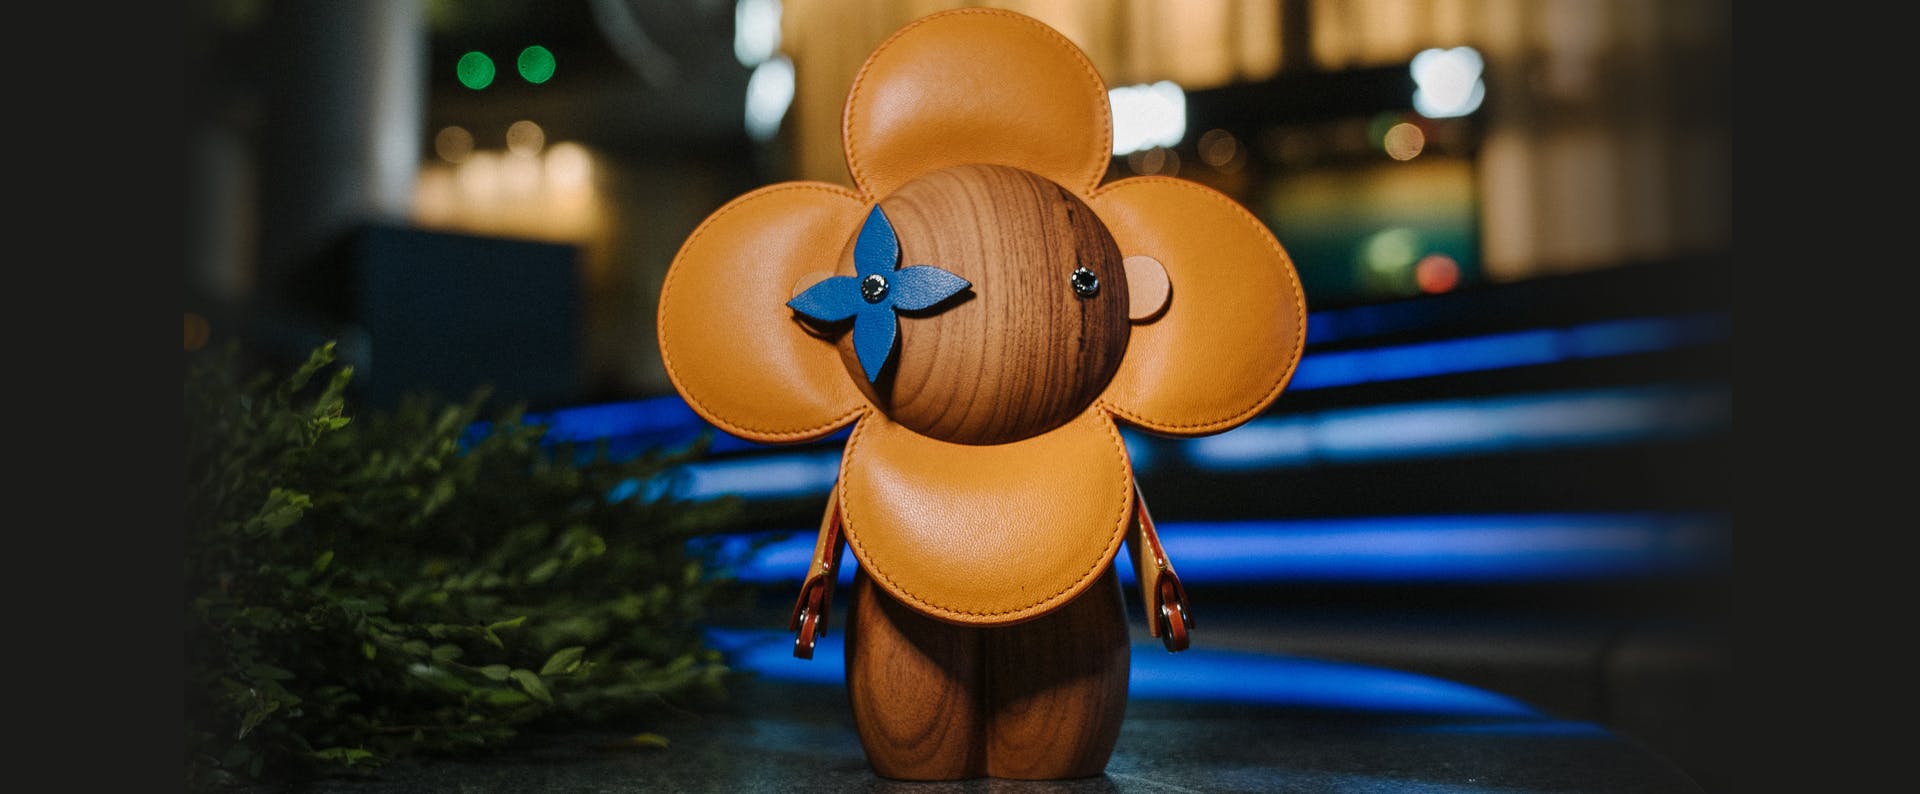 Vivienne, the iconic Louis Vuitton mascot, enters the world of jewelry. -  ZOE Magazine